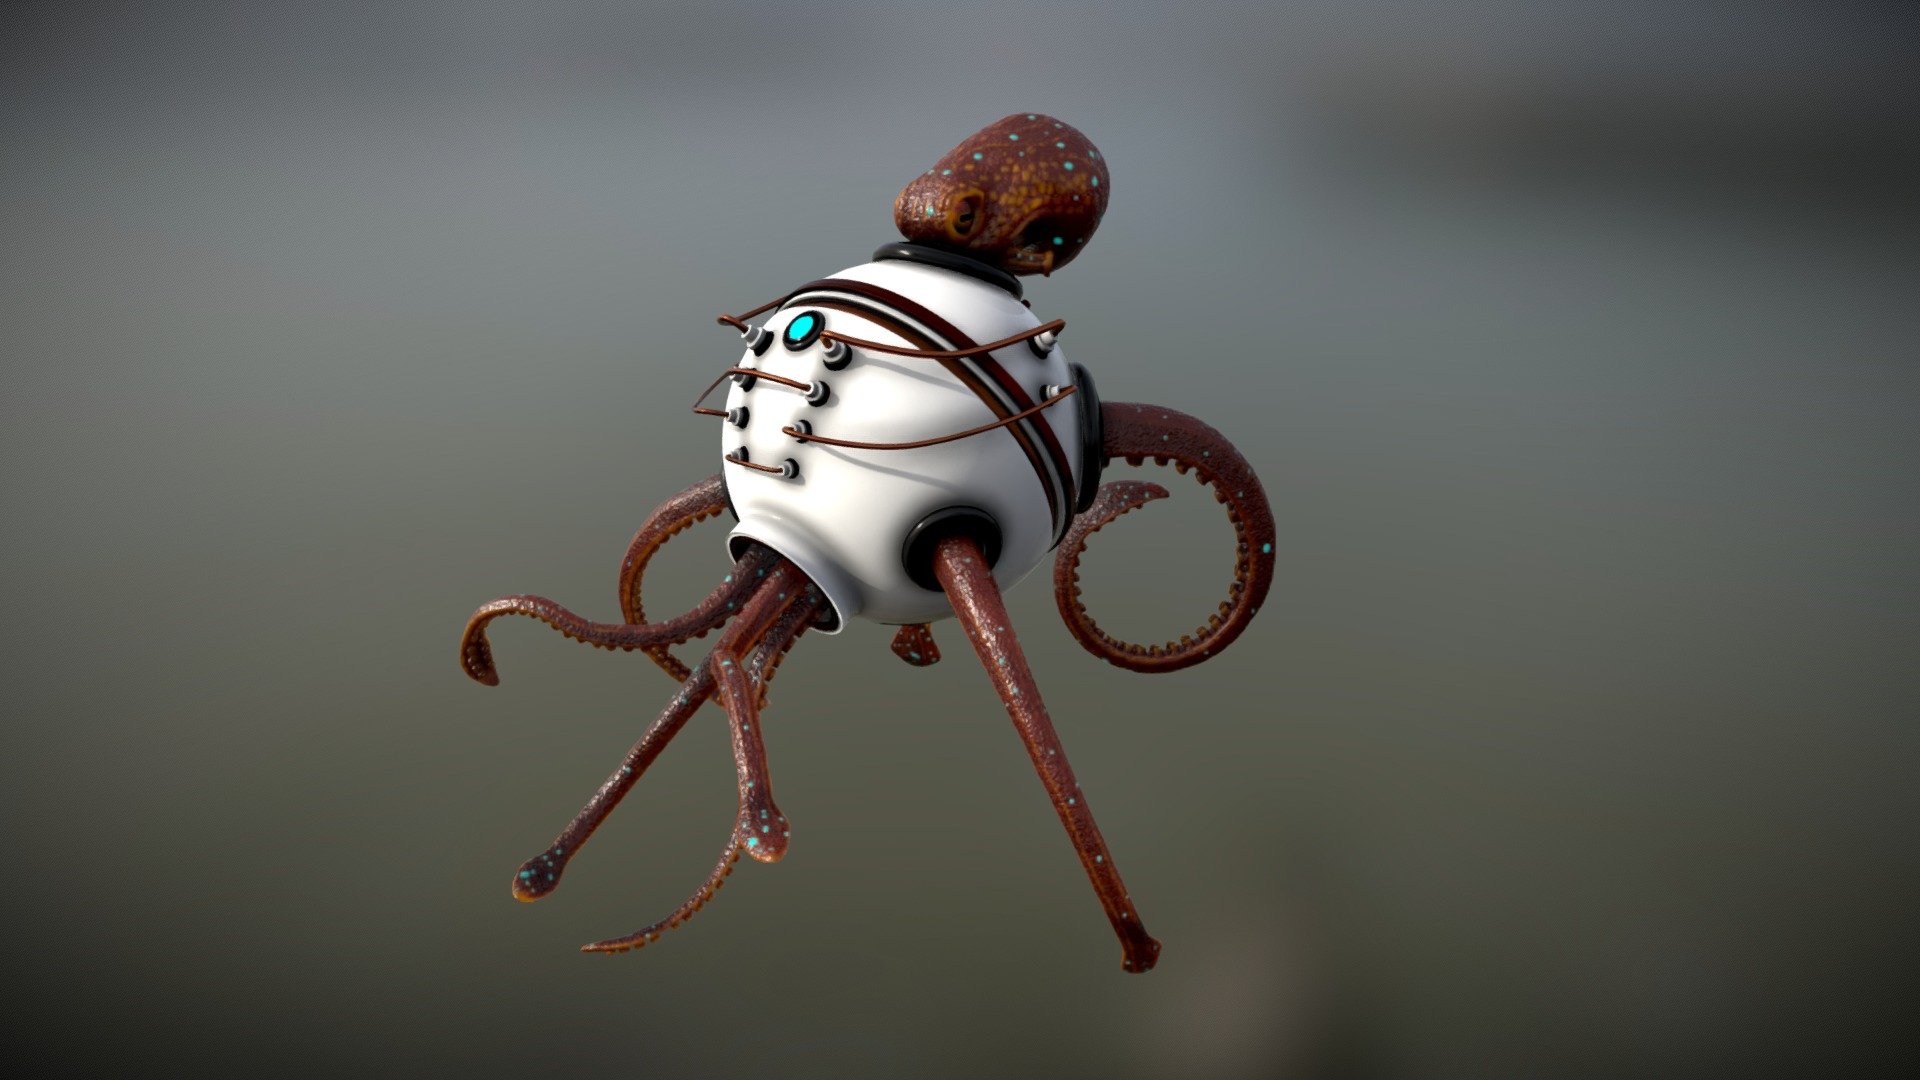 This is an octopus. His name is Squiddy. He got a pod thing for dry land. Fully rigged and animated. Made with 3Ds Max, Mudbox, and Substance Painter 3d model